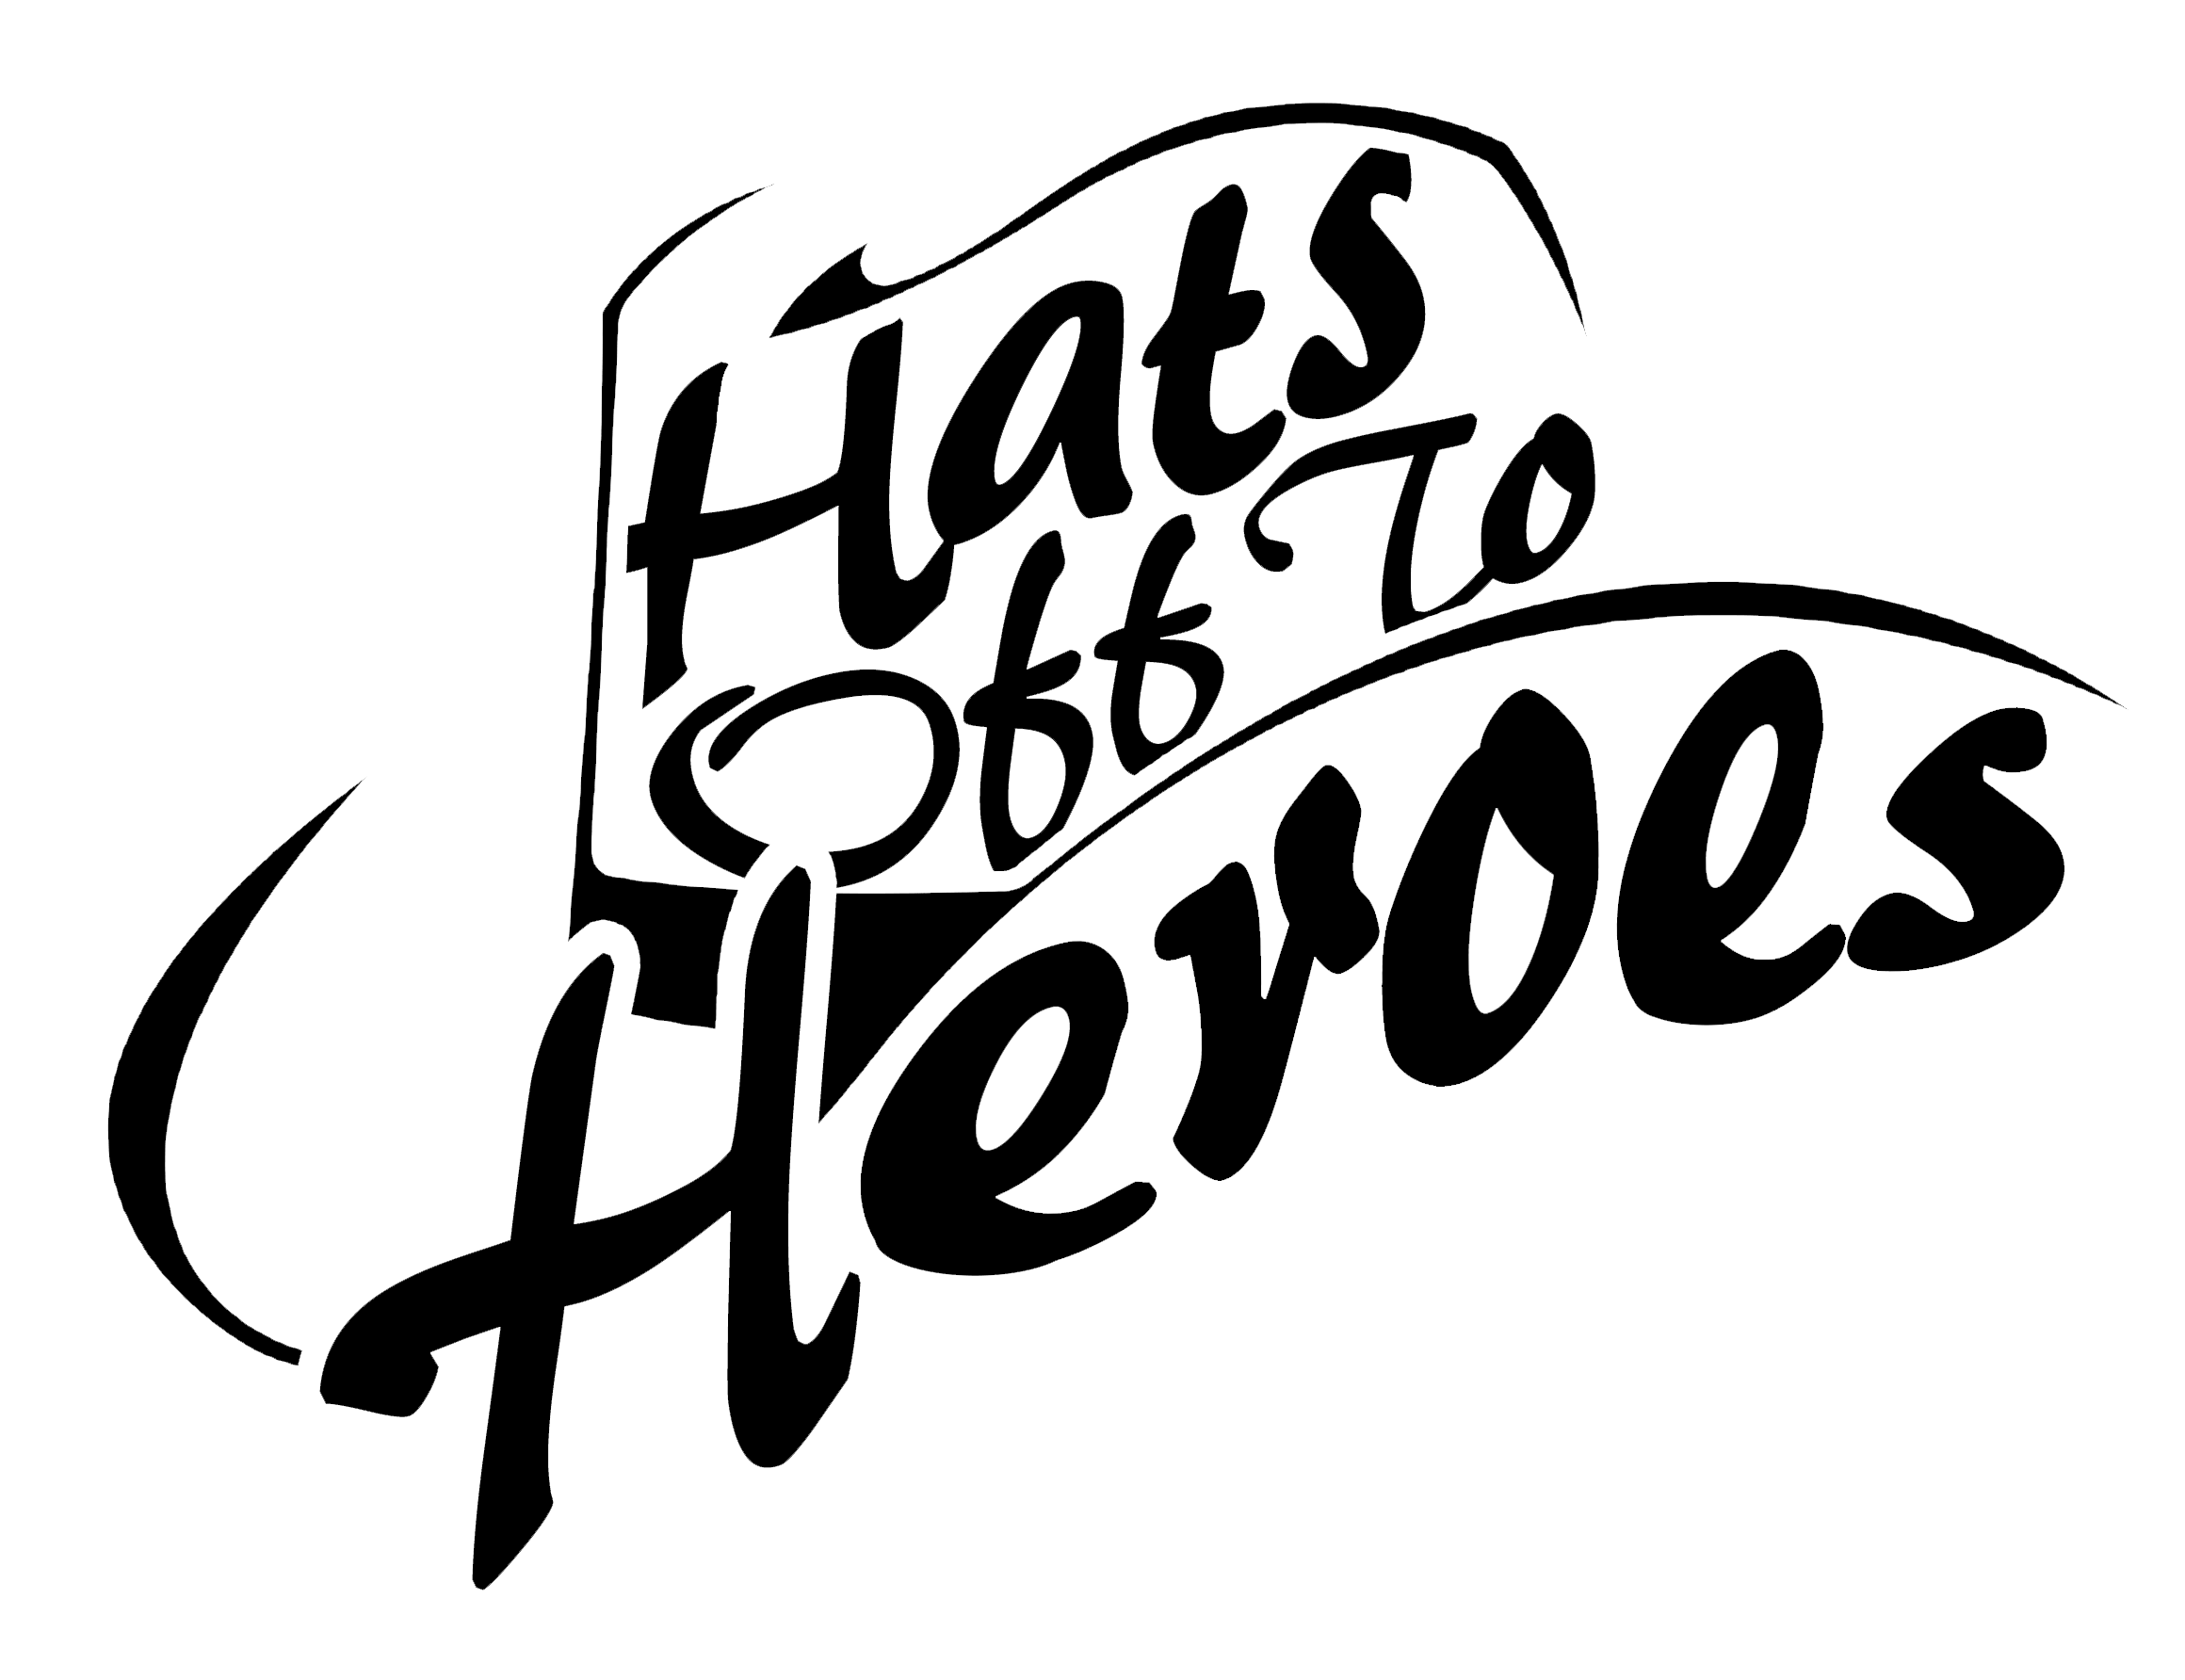 Hats Off To Heroes KTFWFM